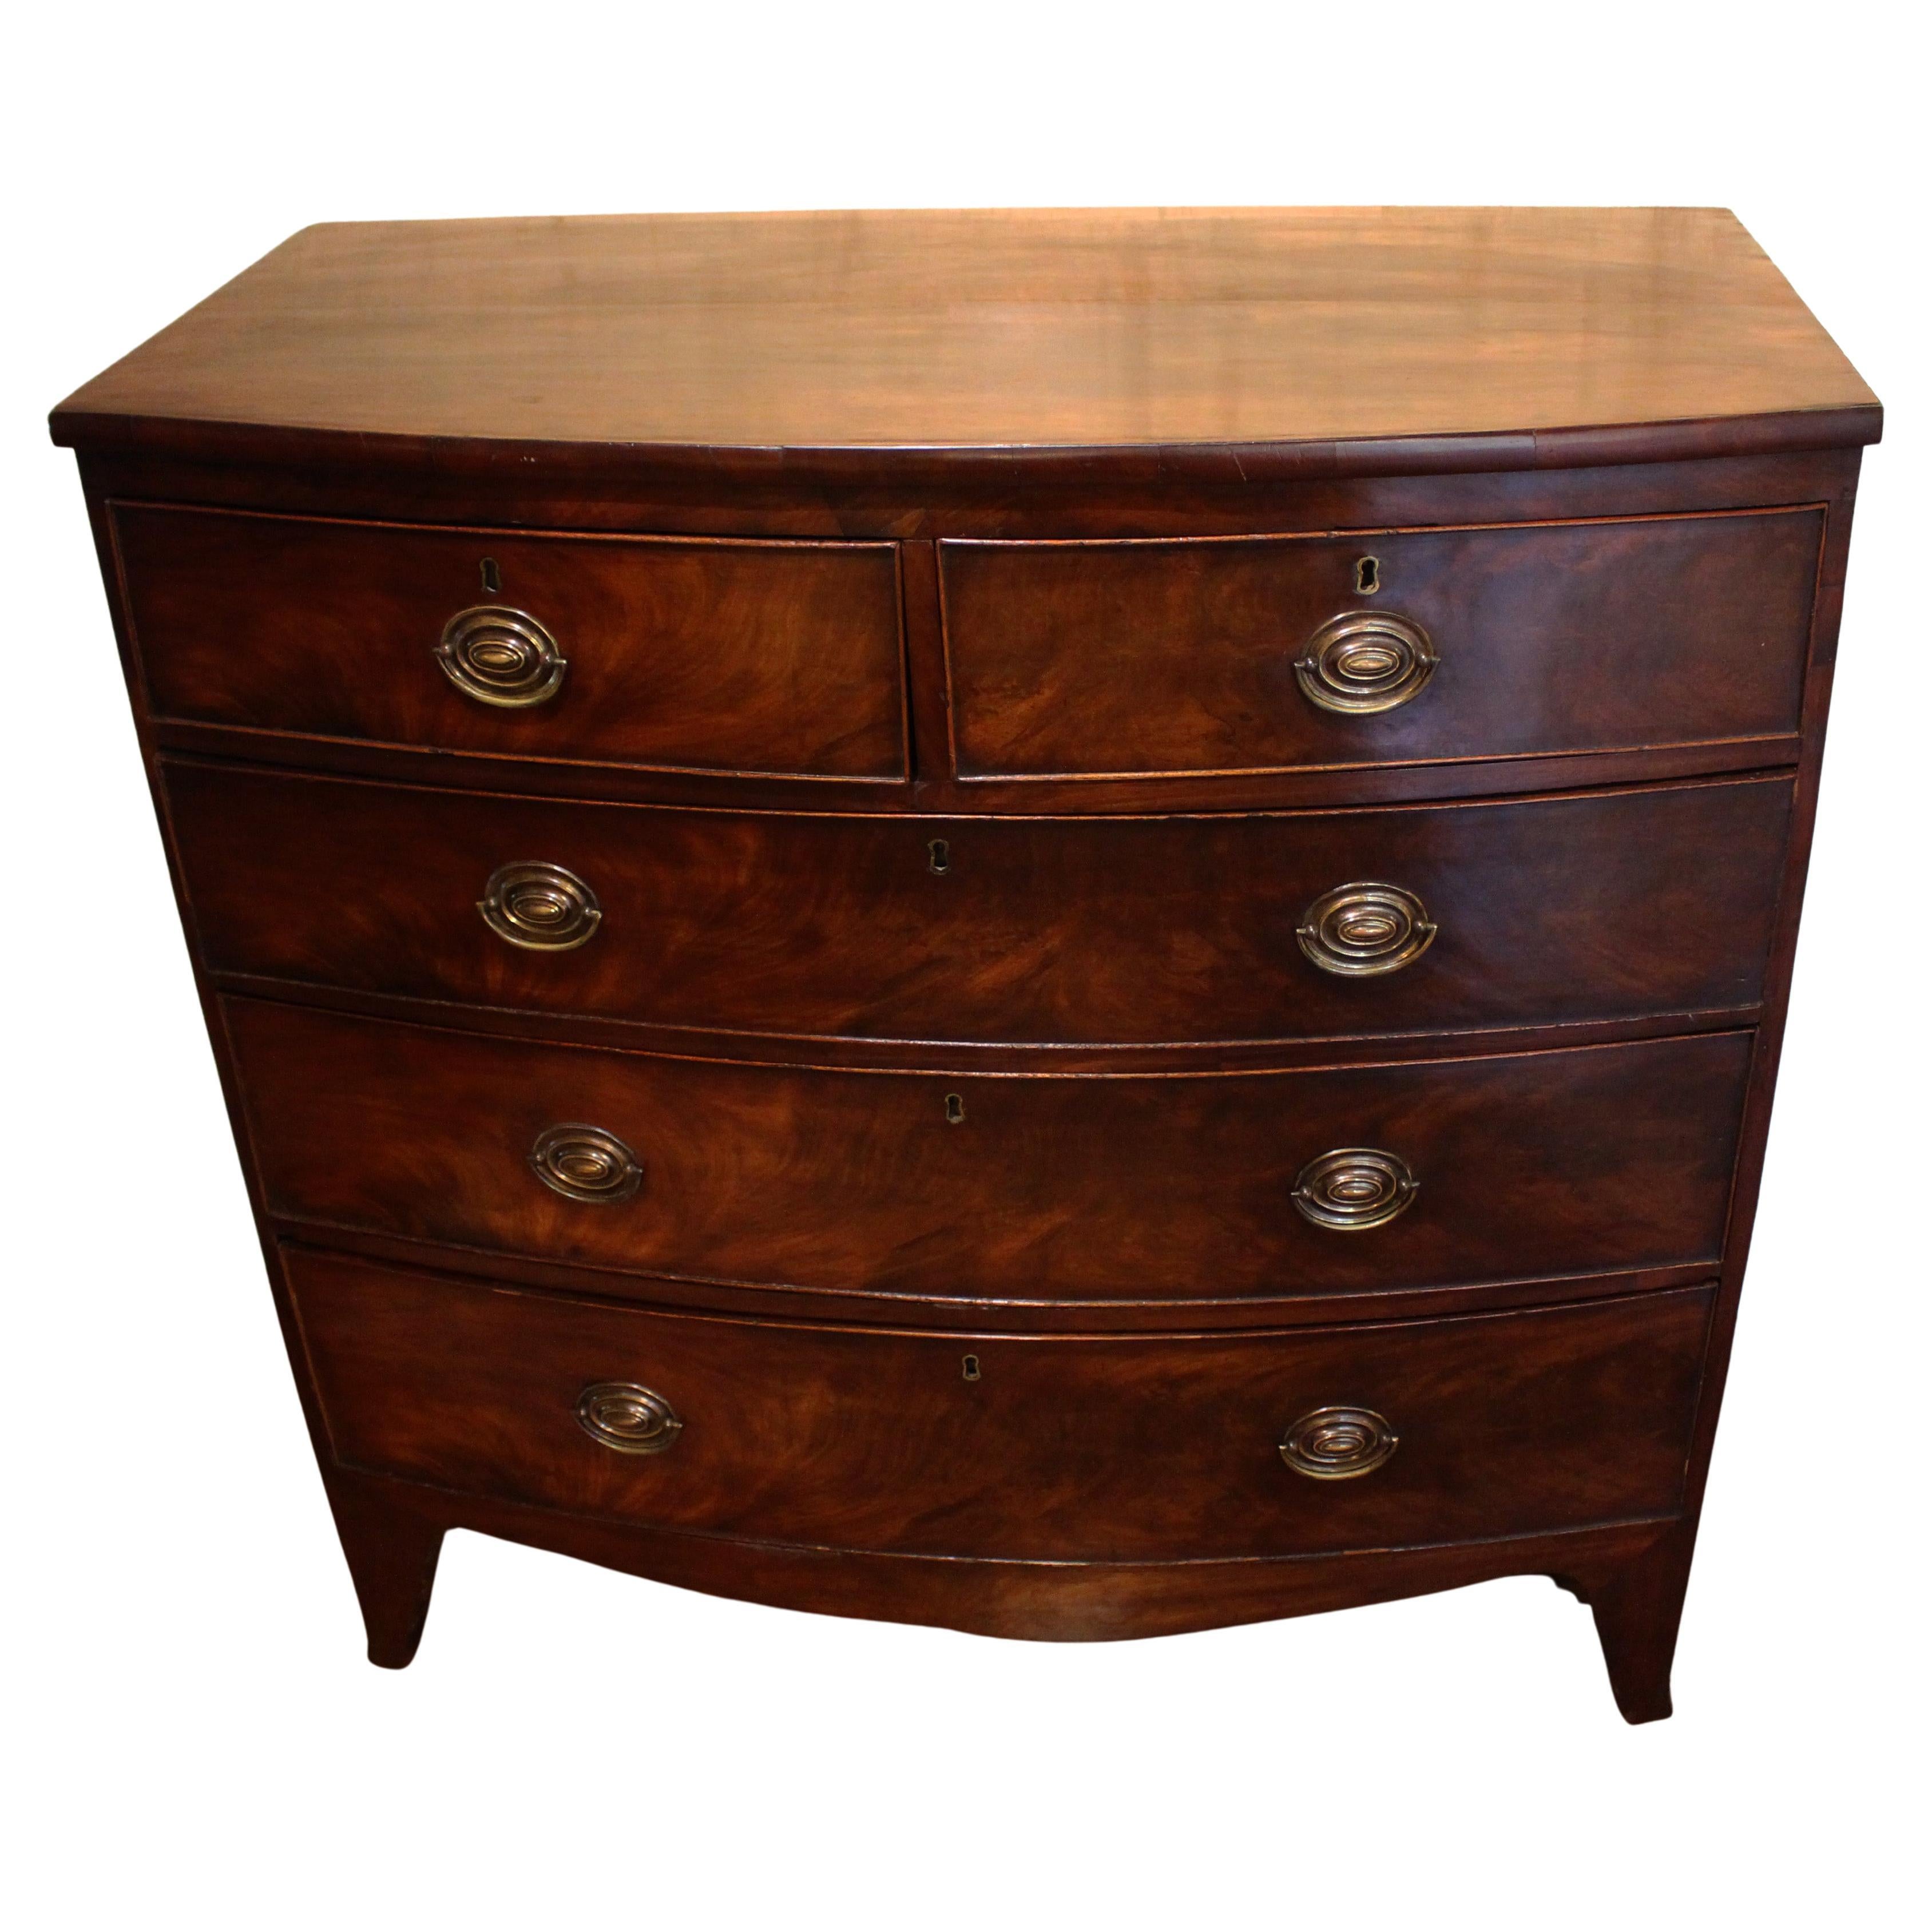 Circa 1830 English Bowfront Chest of Drawers